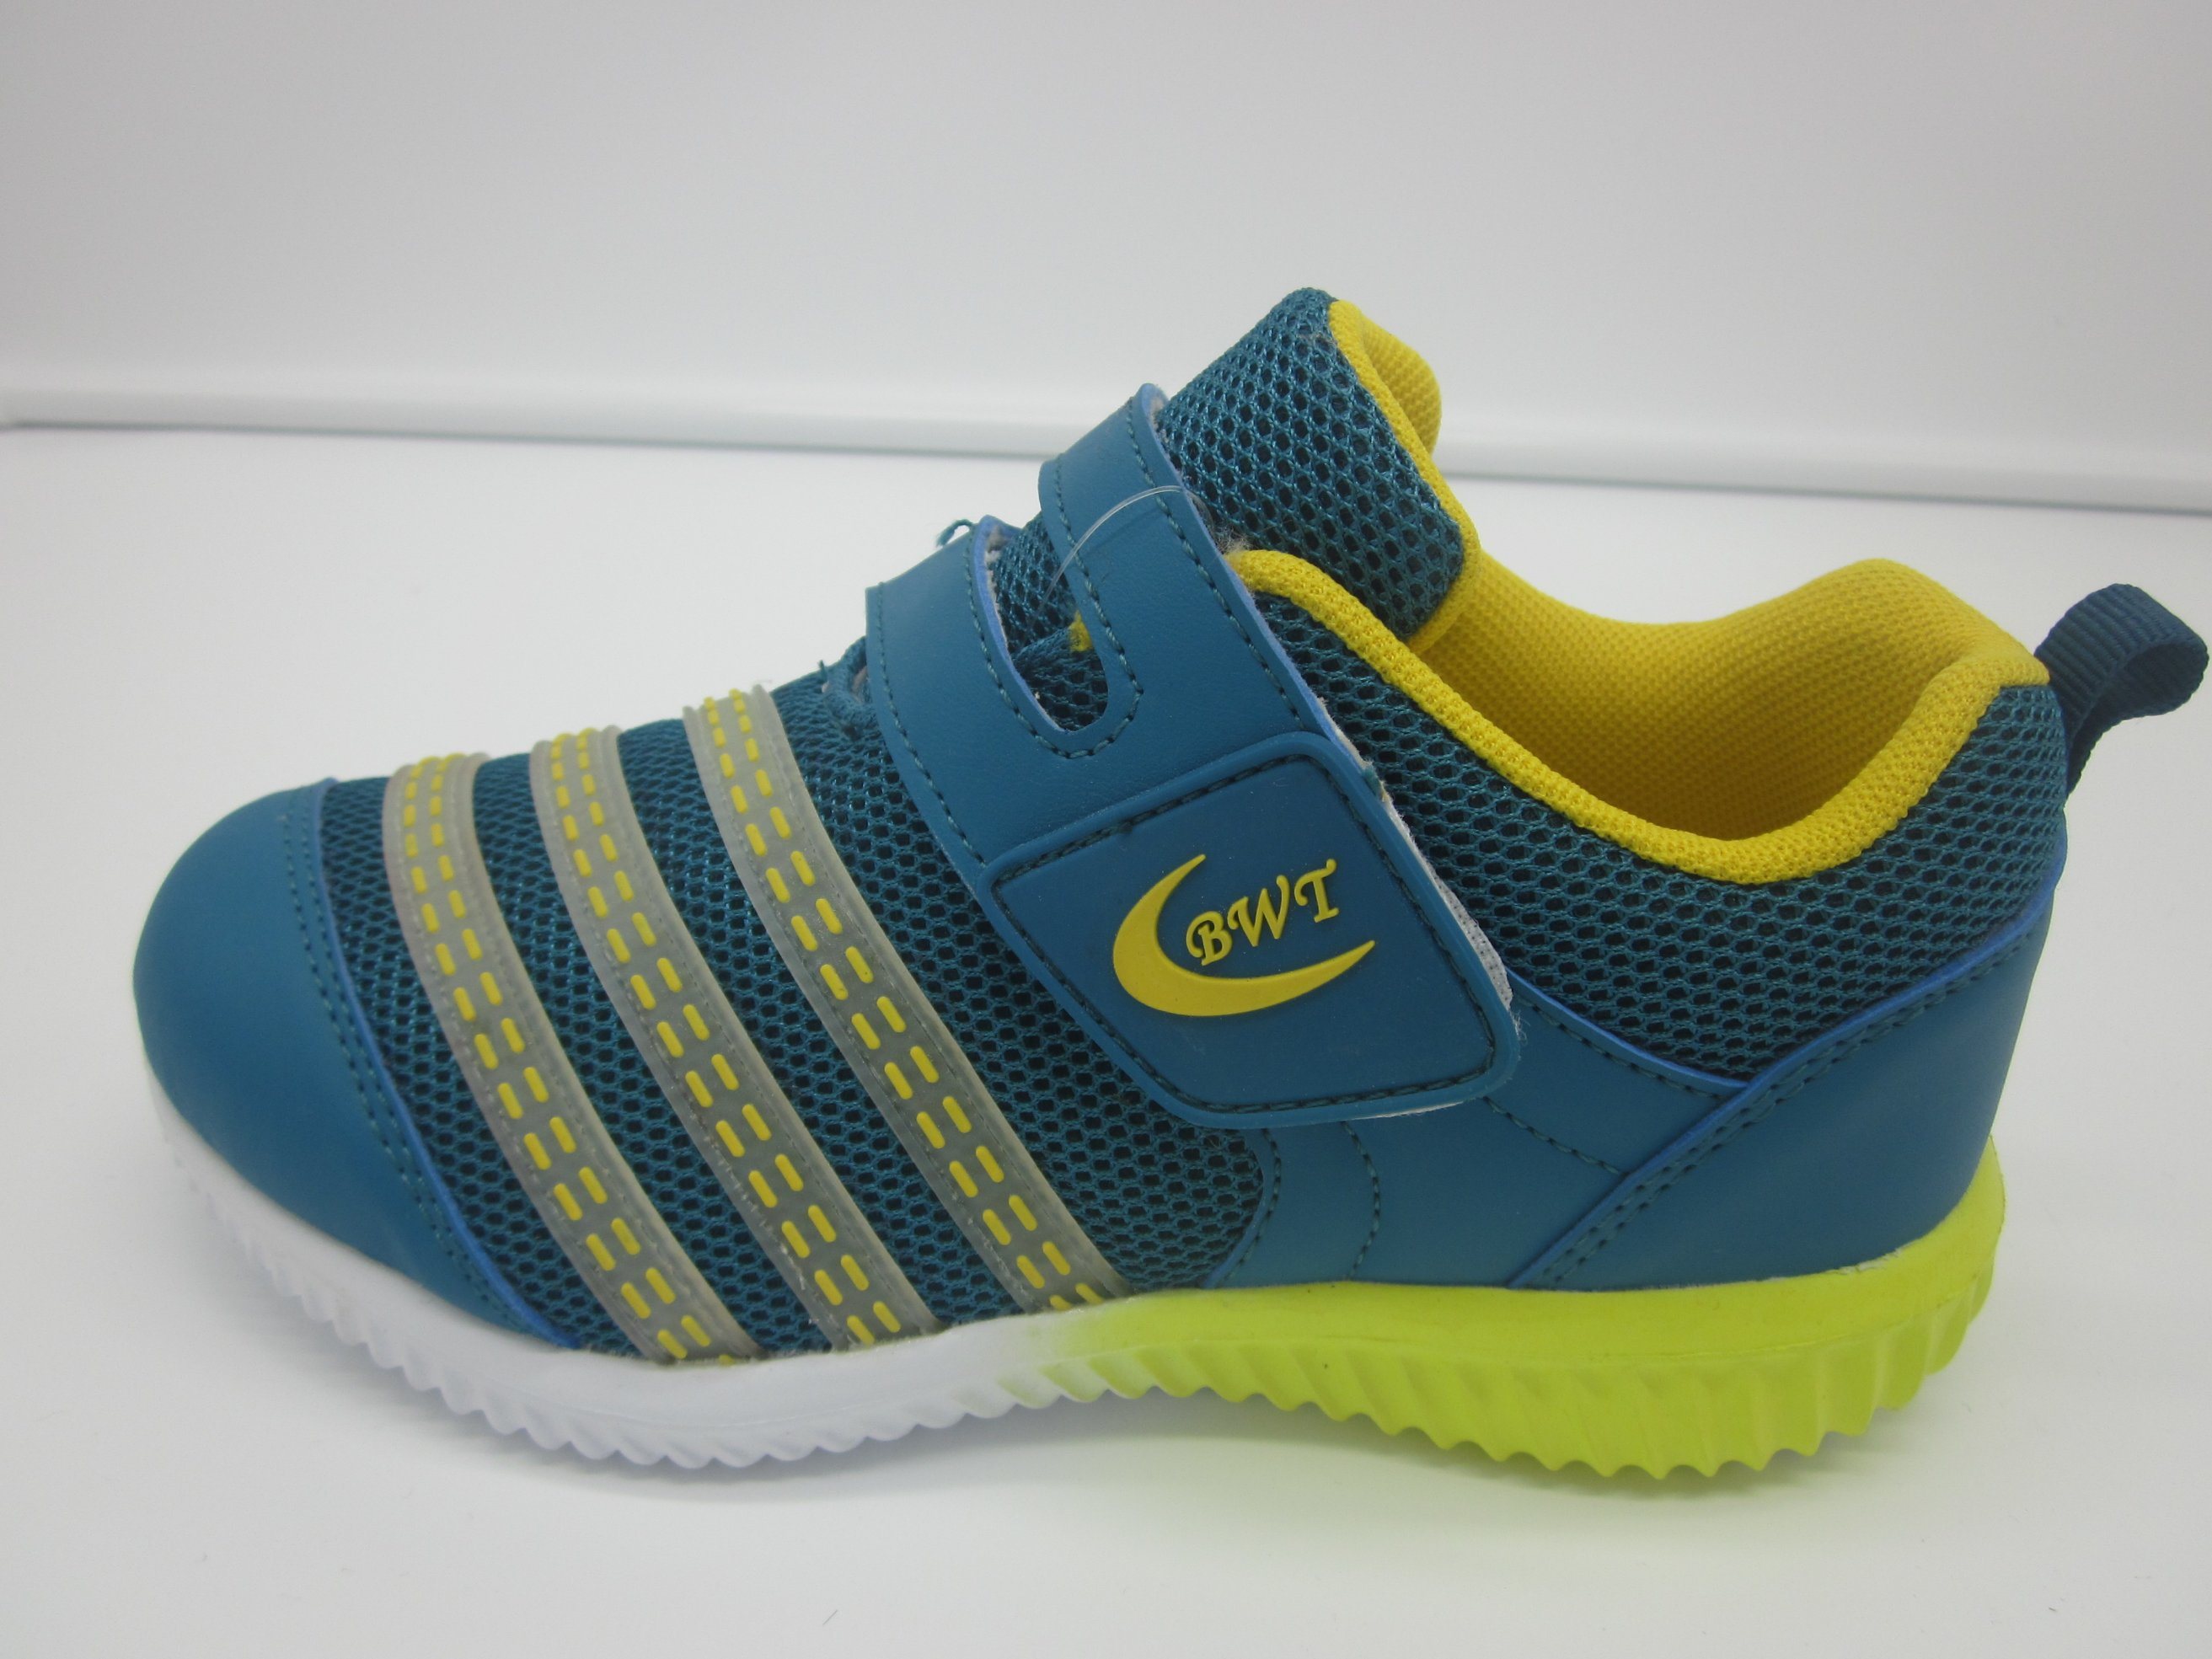 Sport Shoes Cheap Casual Footwear for Children